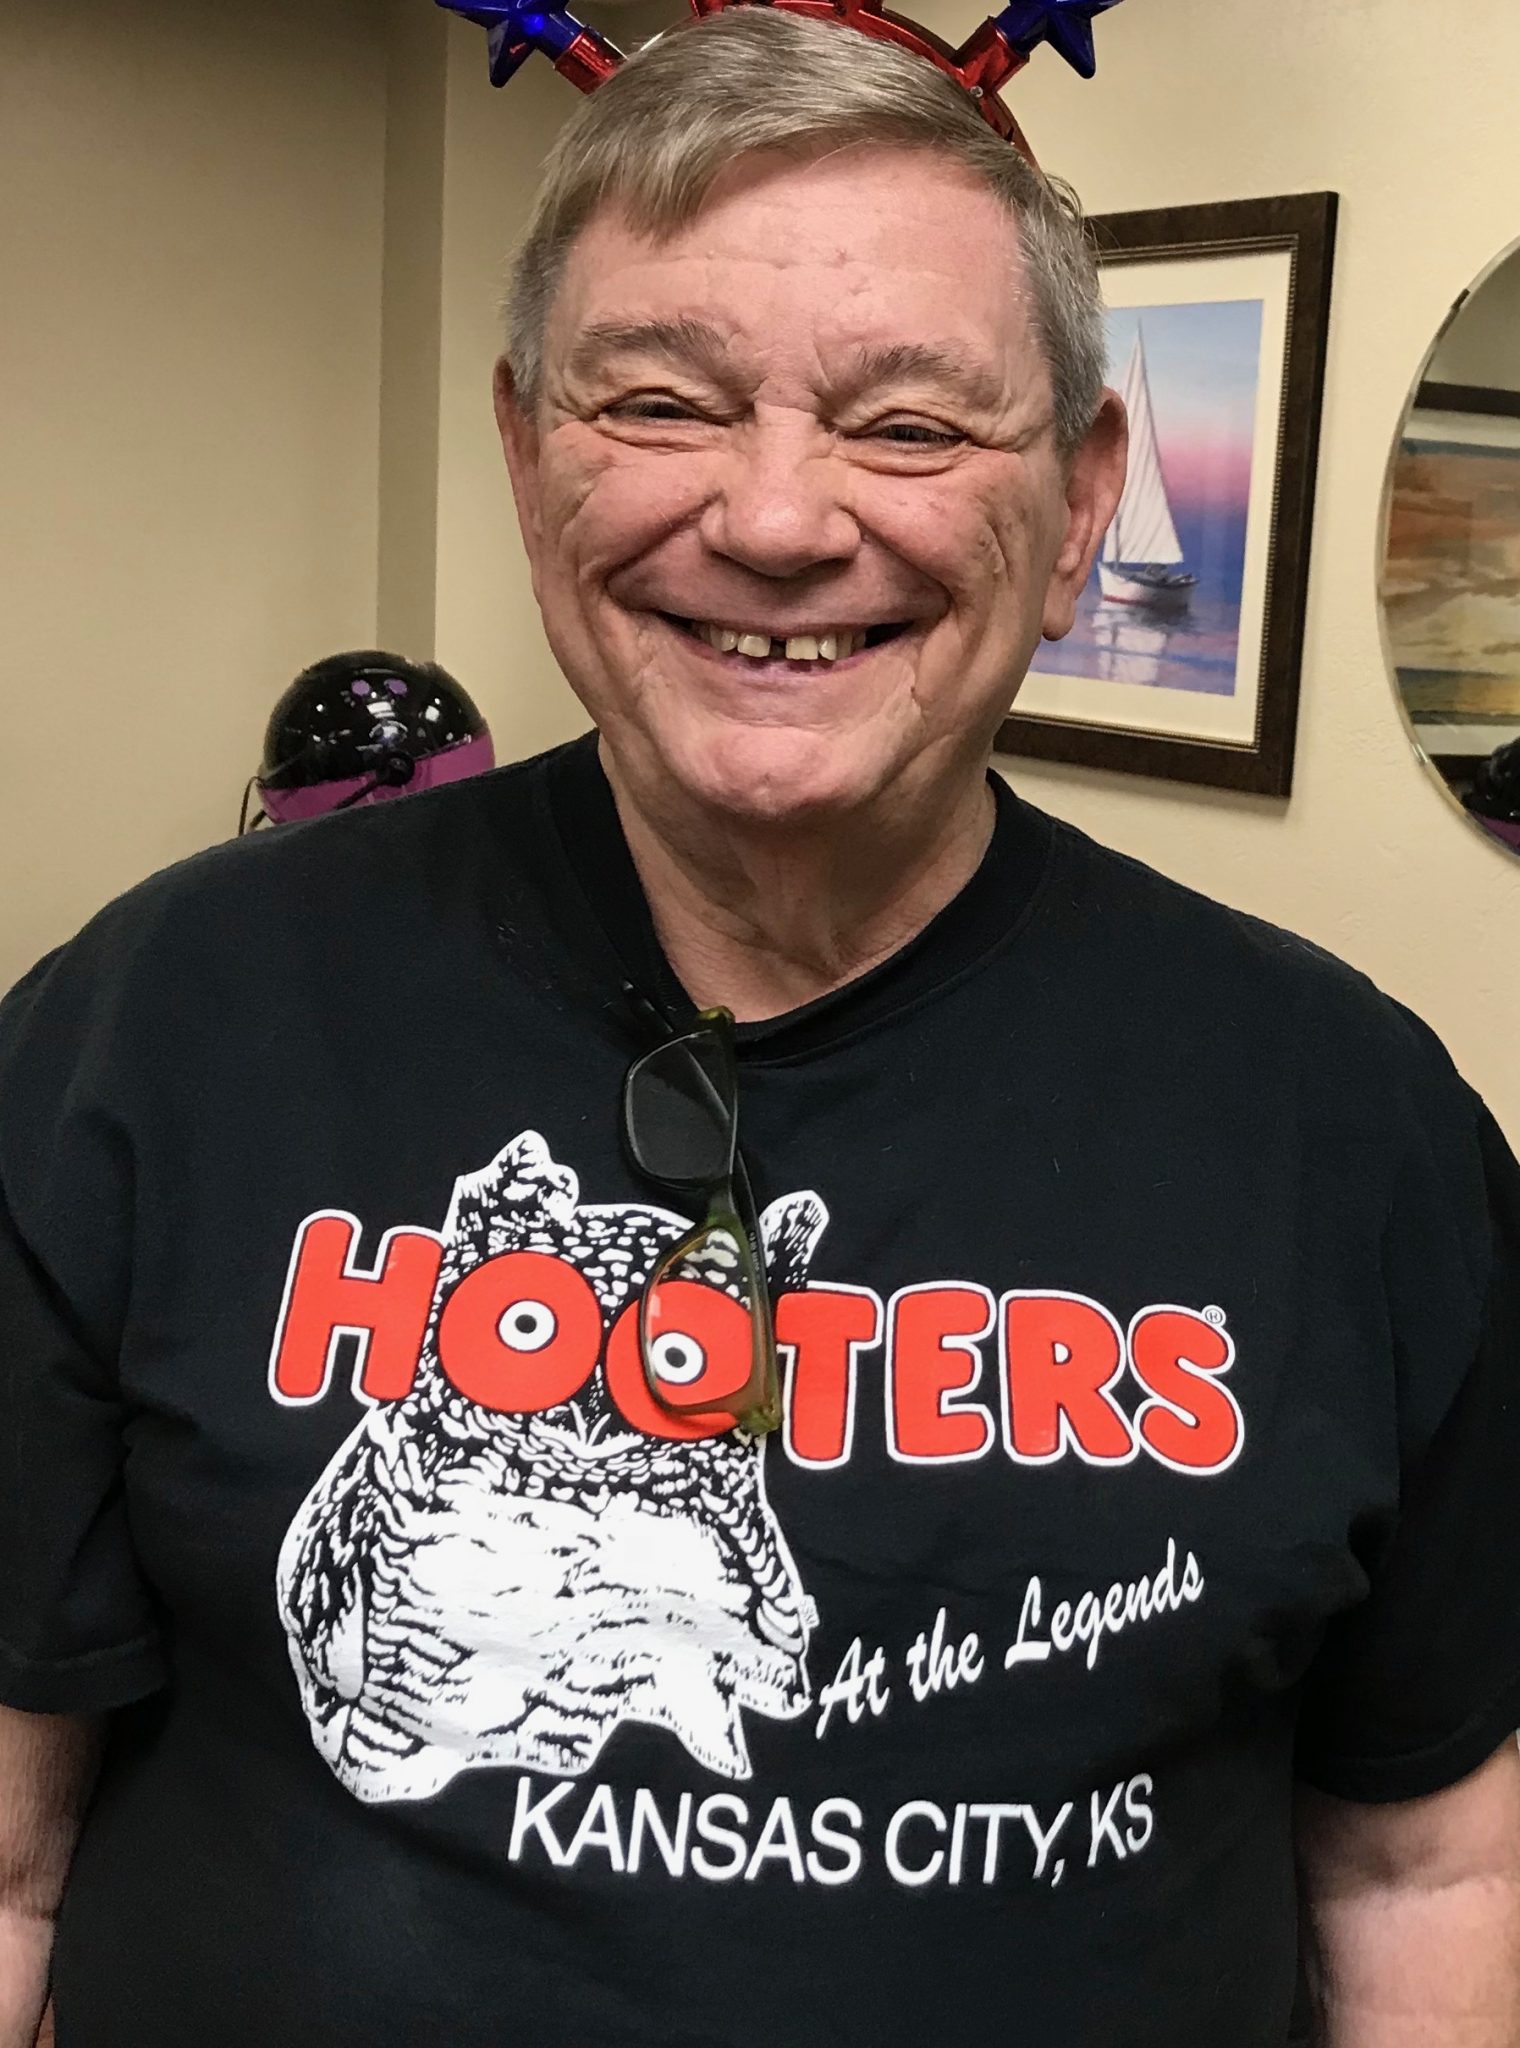 Hooter’s and Kansas City - two of Dennis’ favorite things!